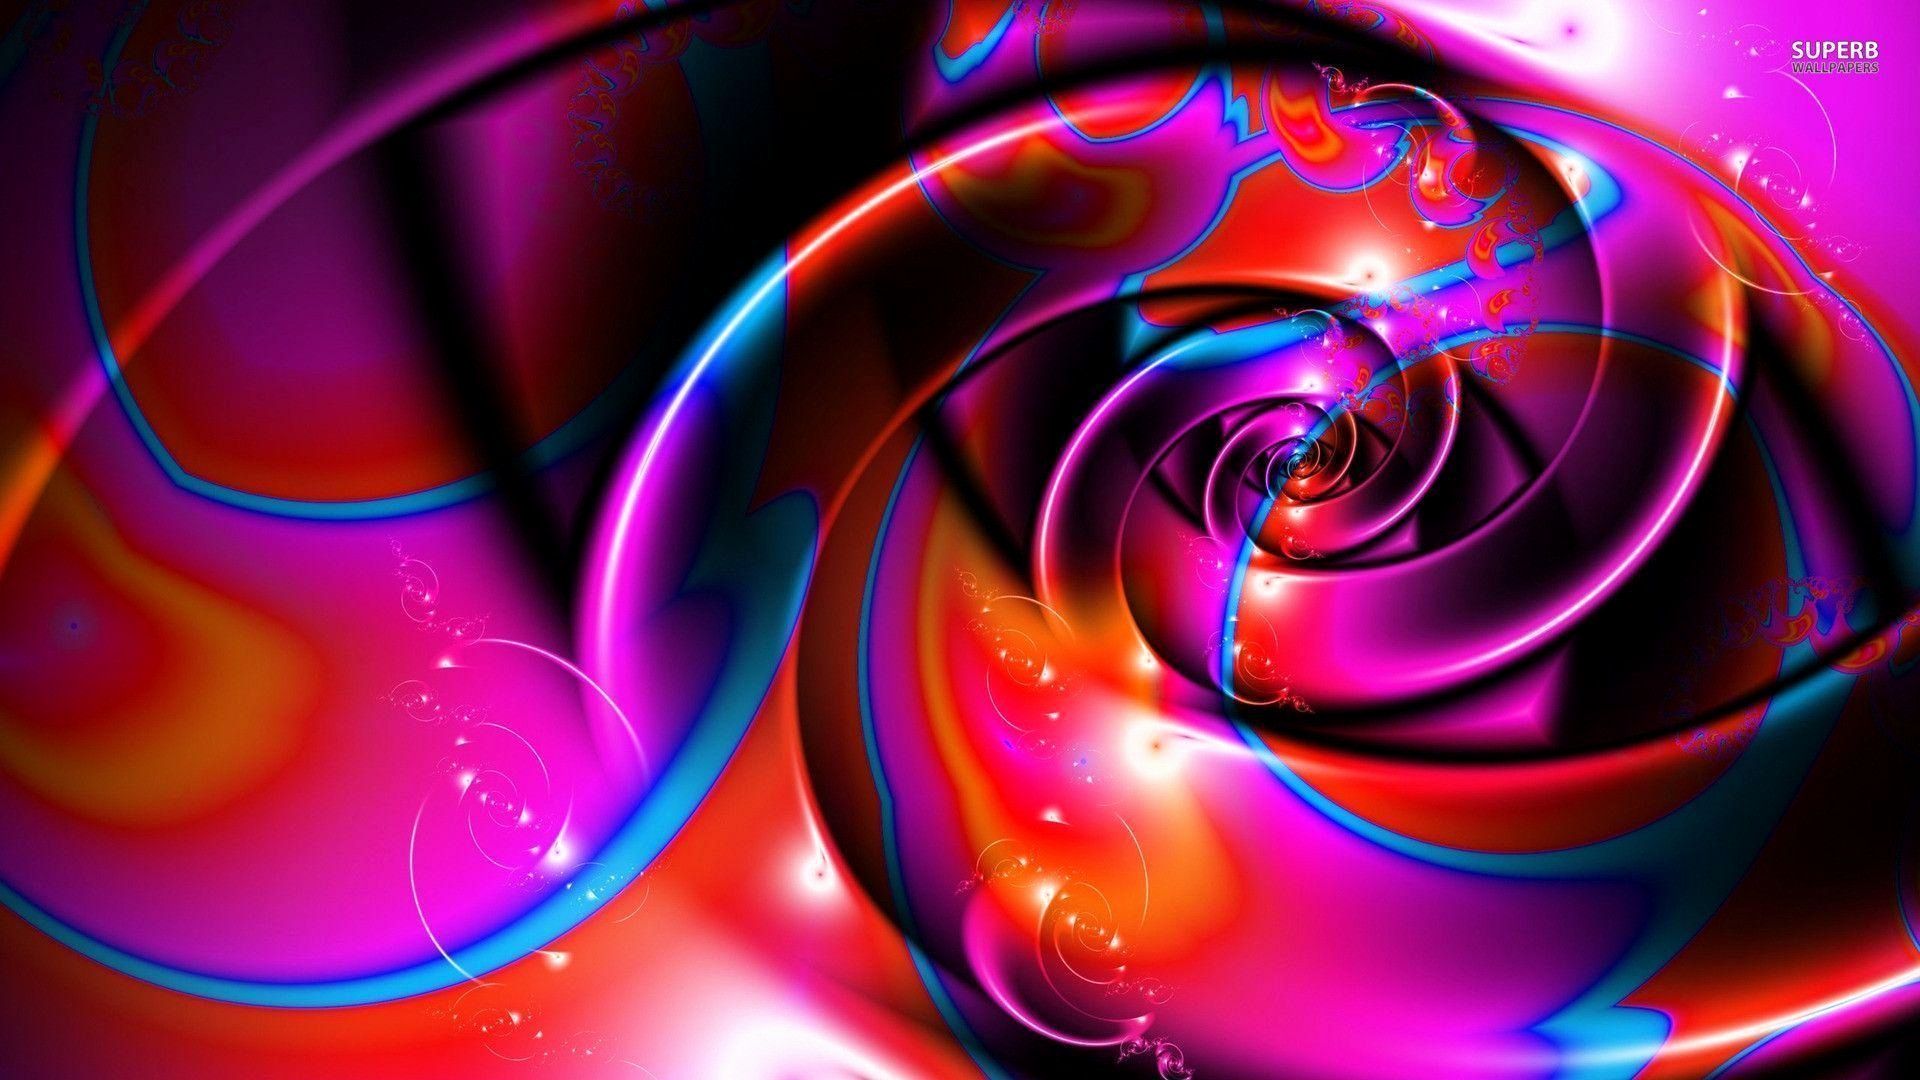 Swirling Wallpaper Lovely Abstract Wallpaper Set 33 Awesome